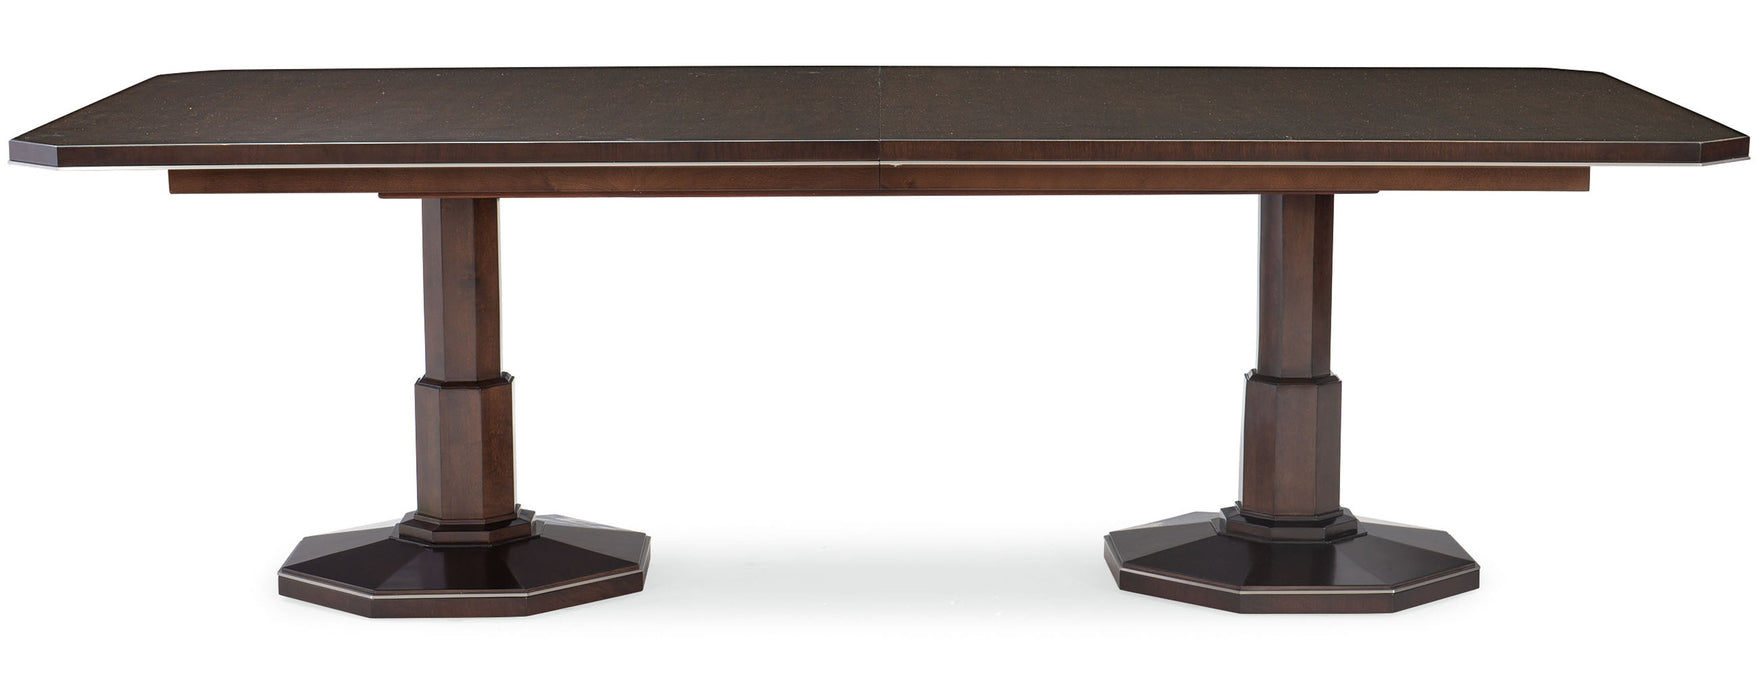 Caracole Classic Cult Classic Dining Table DSC Sale